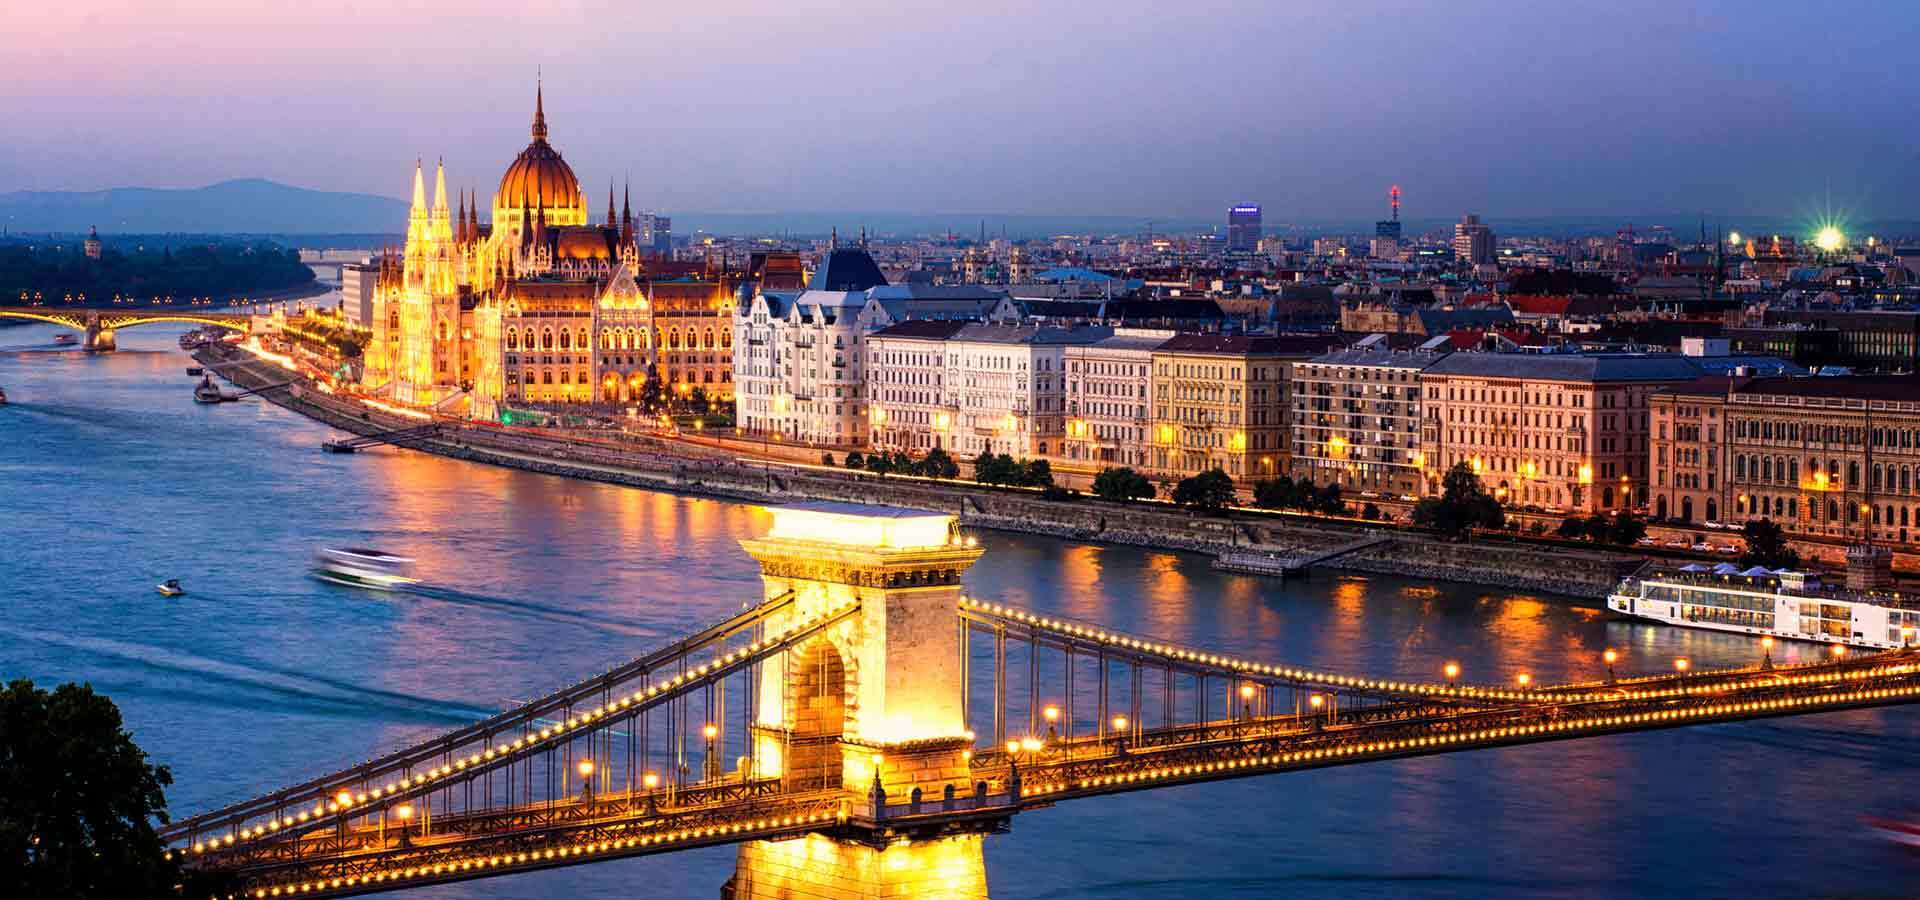 CNW Courier NetWork Strengthening Its Position in Eastern Europe with New Hungary Office